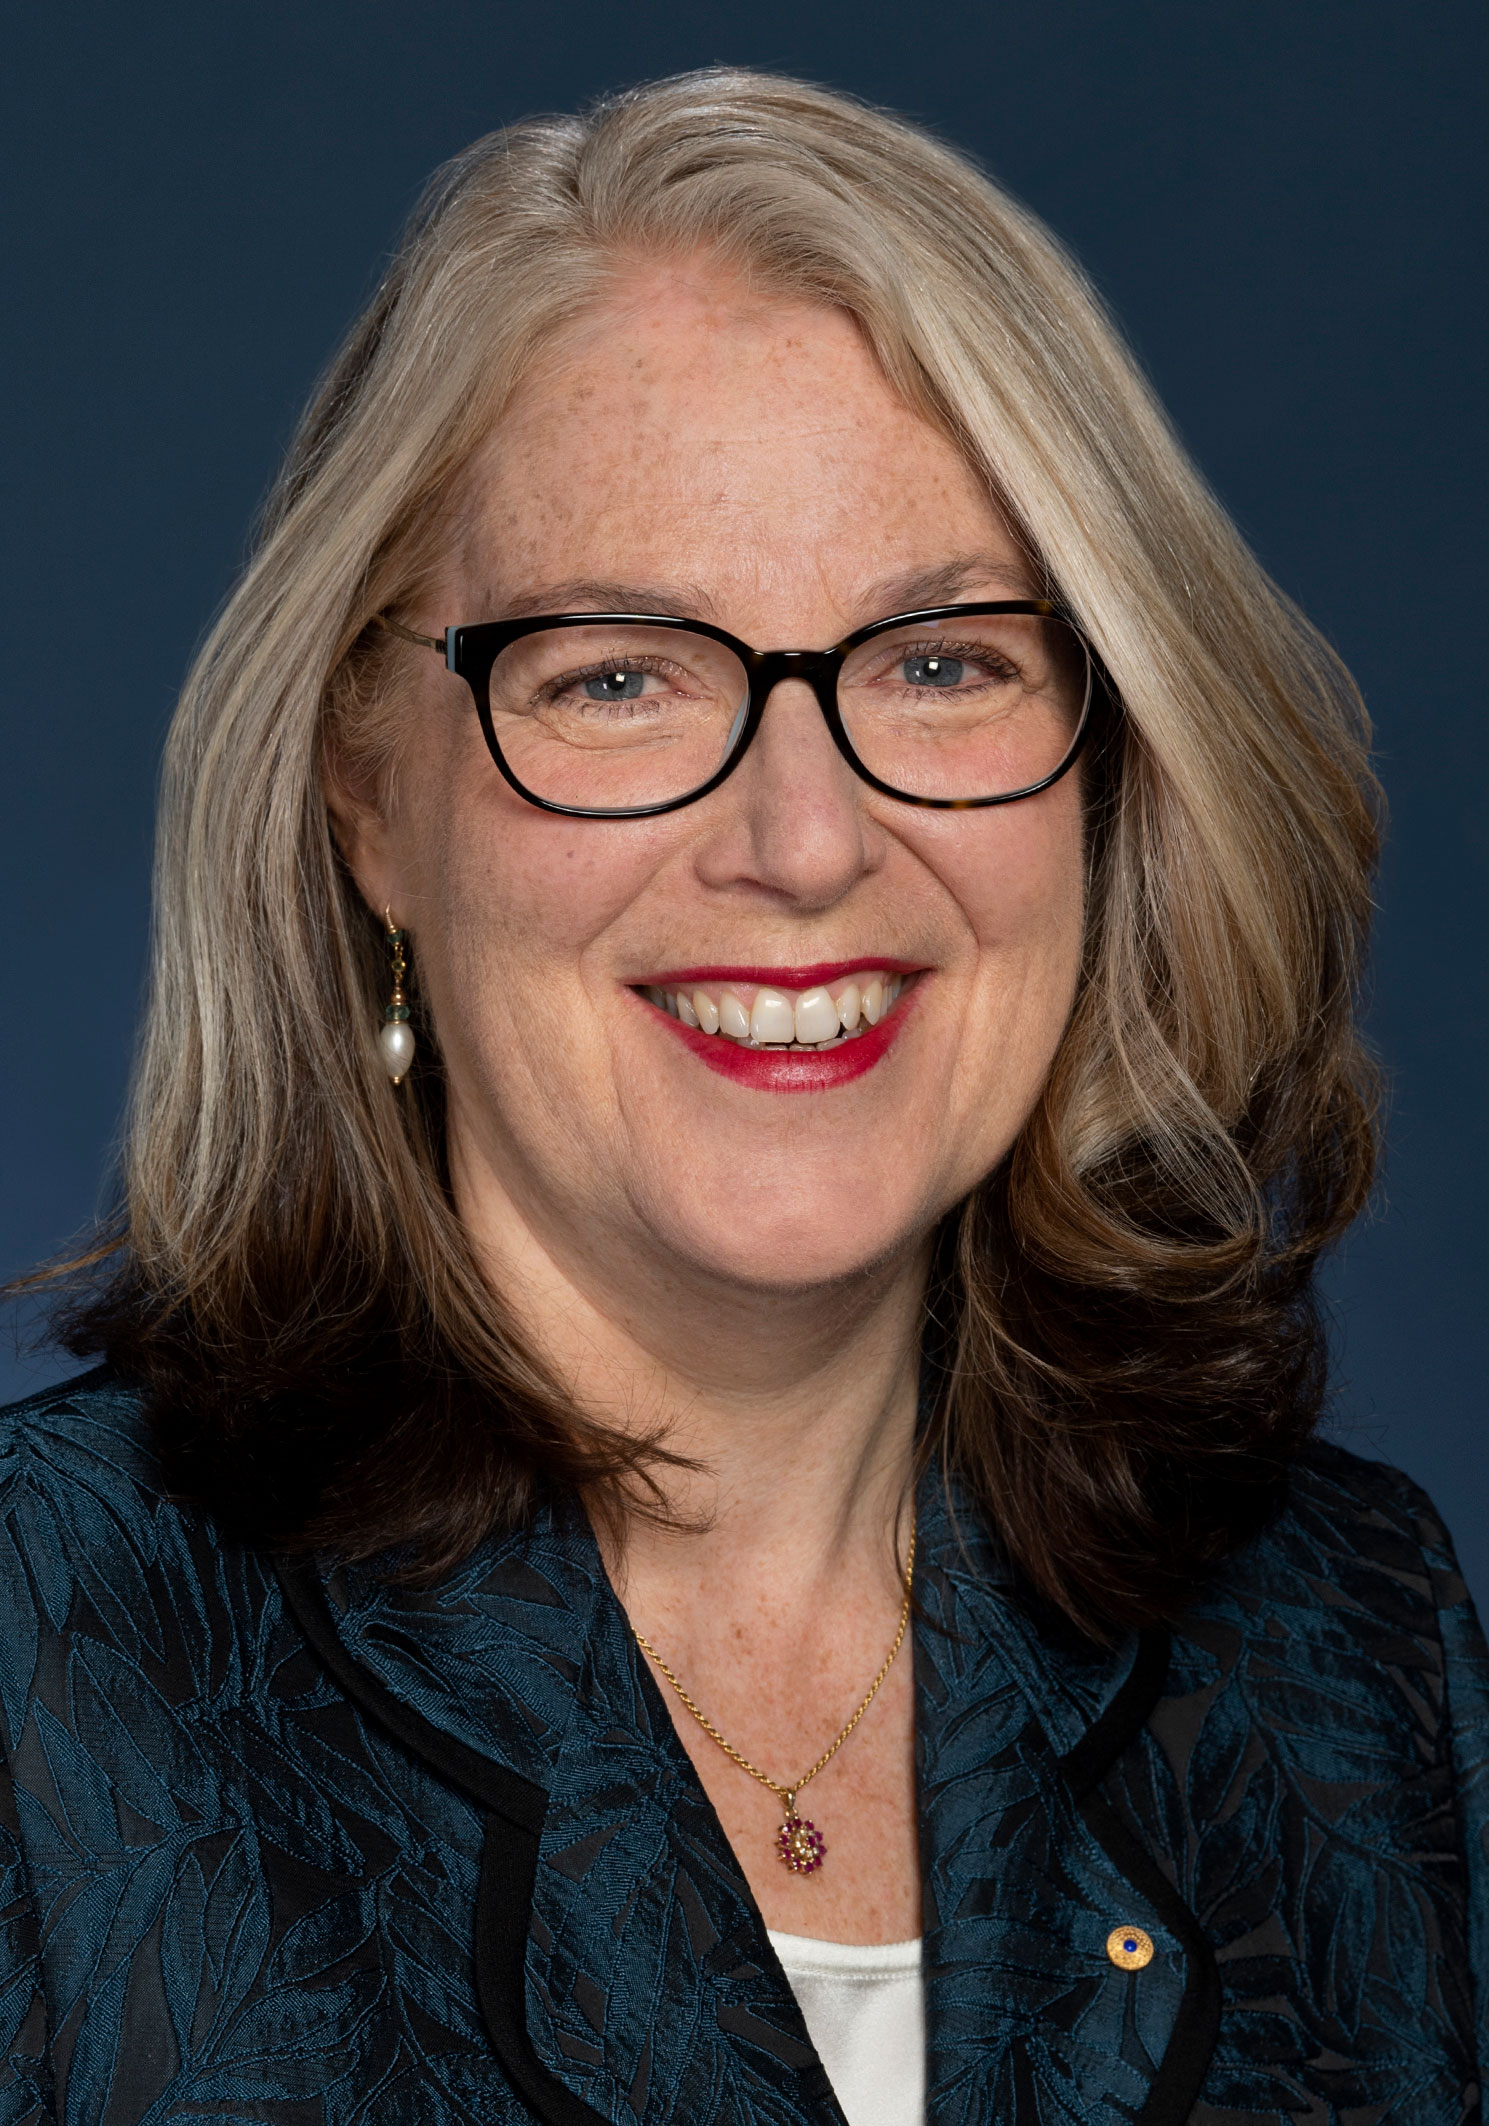 Jan Adams smiles for the camera in an official DFAT portrait